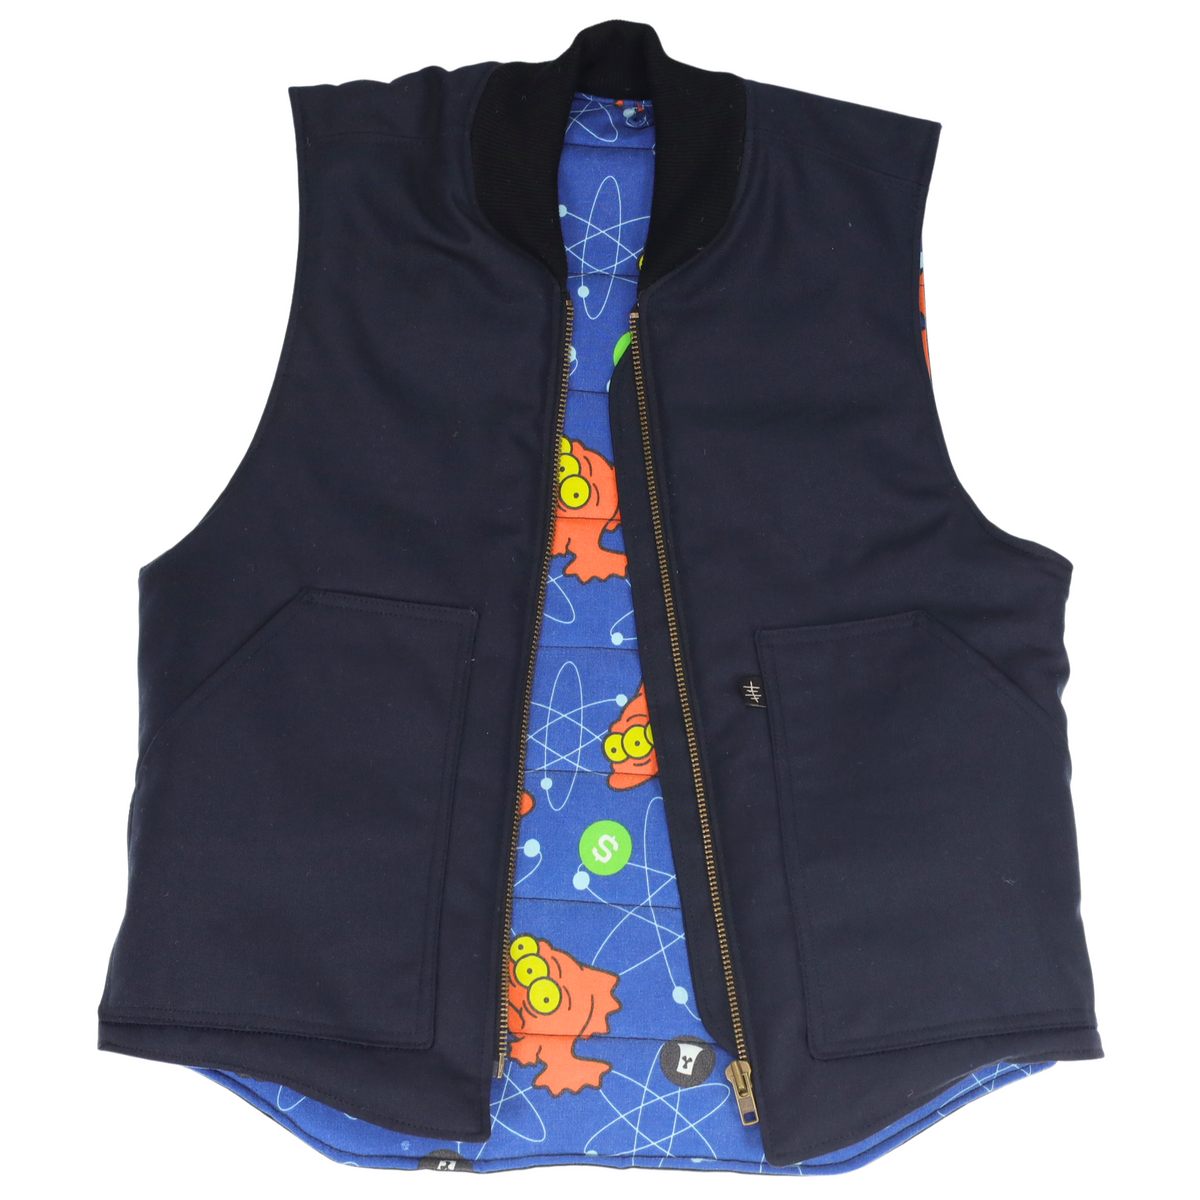 VEST | SIMPSONS - BLINKY THE 3-EYED FISH